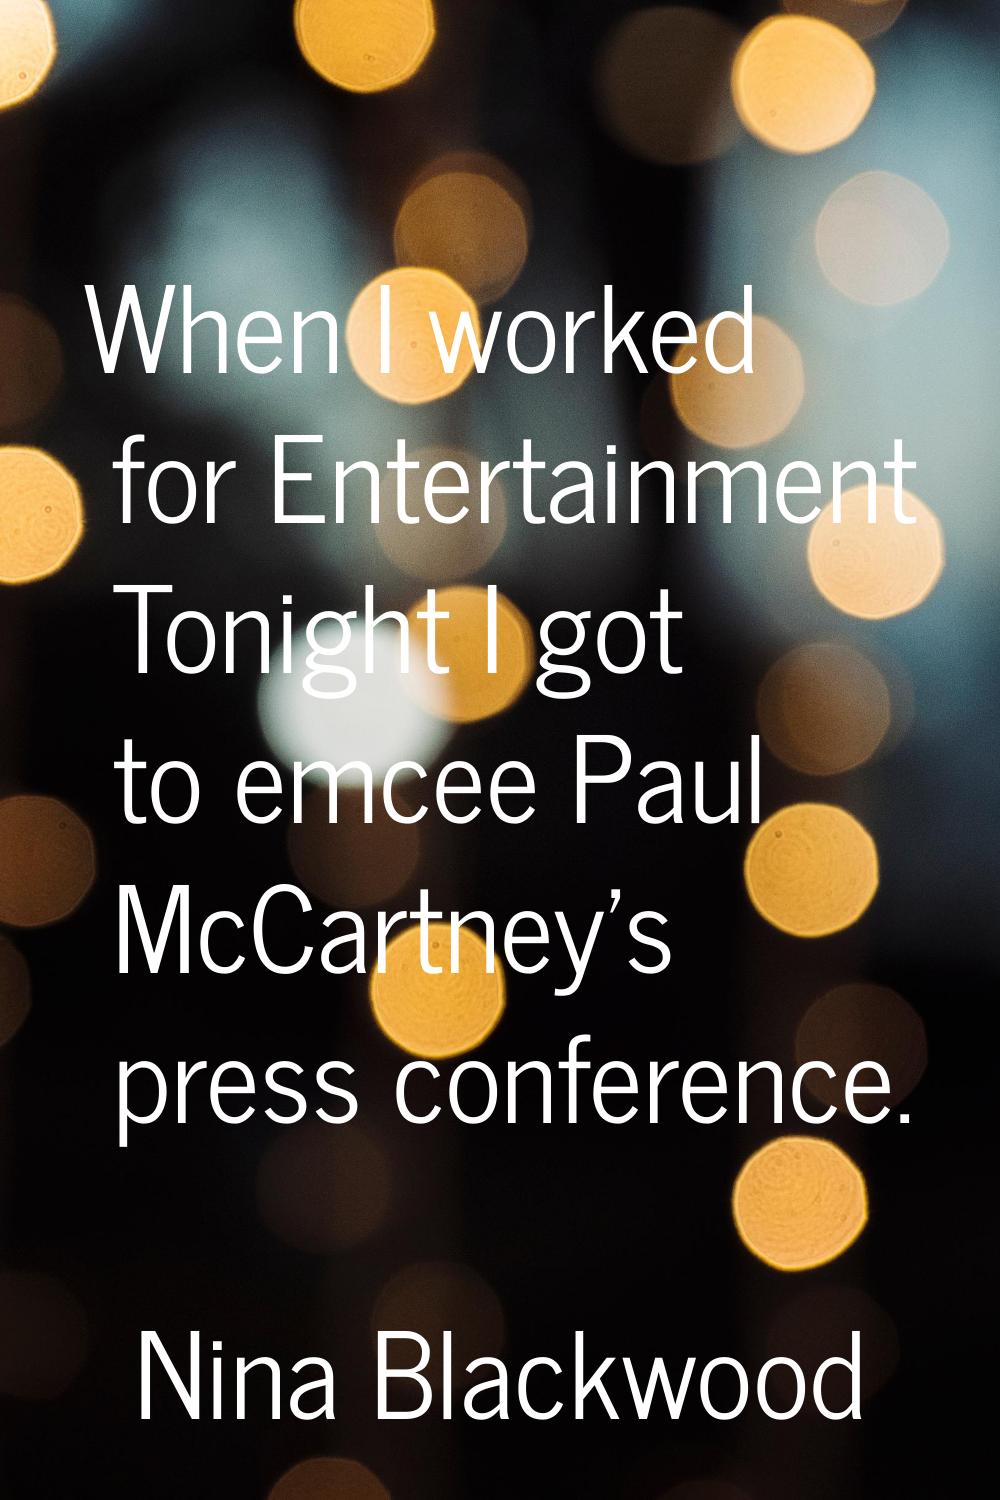 When I worked for Entertainment Tonight I got to emcee Paul McCartney's press conference.